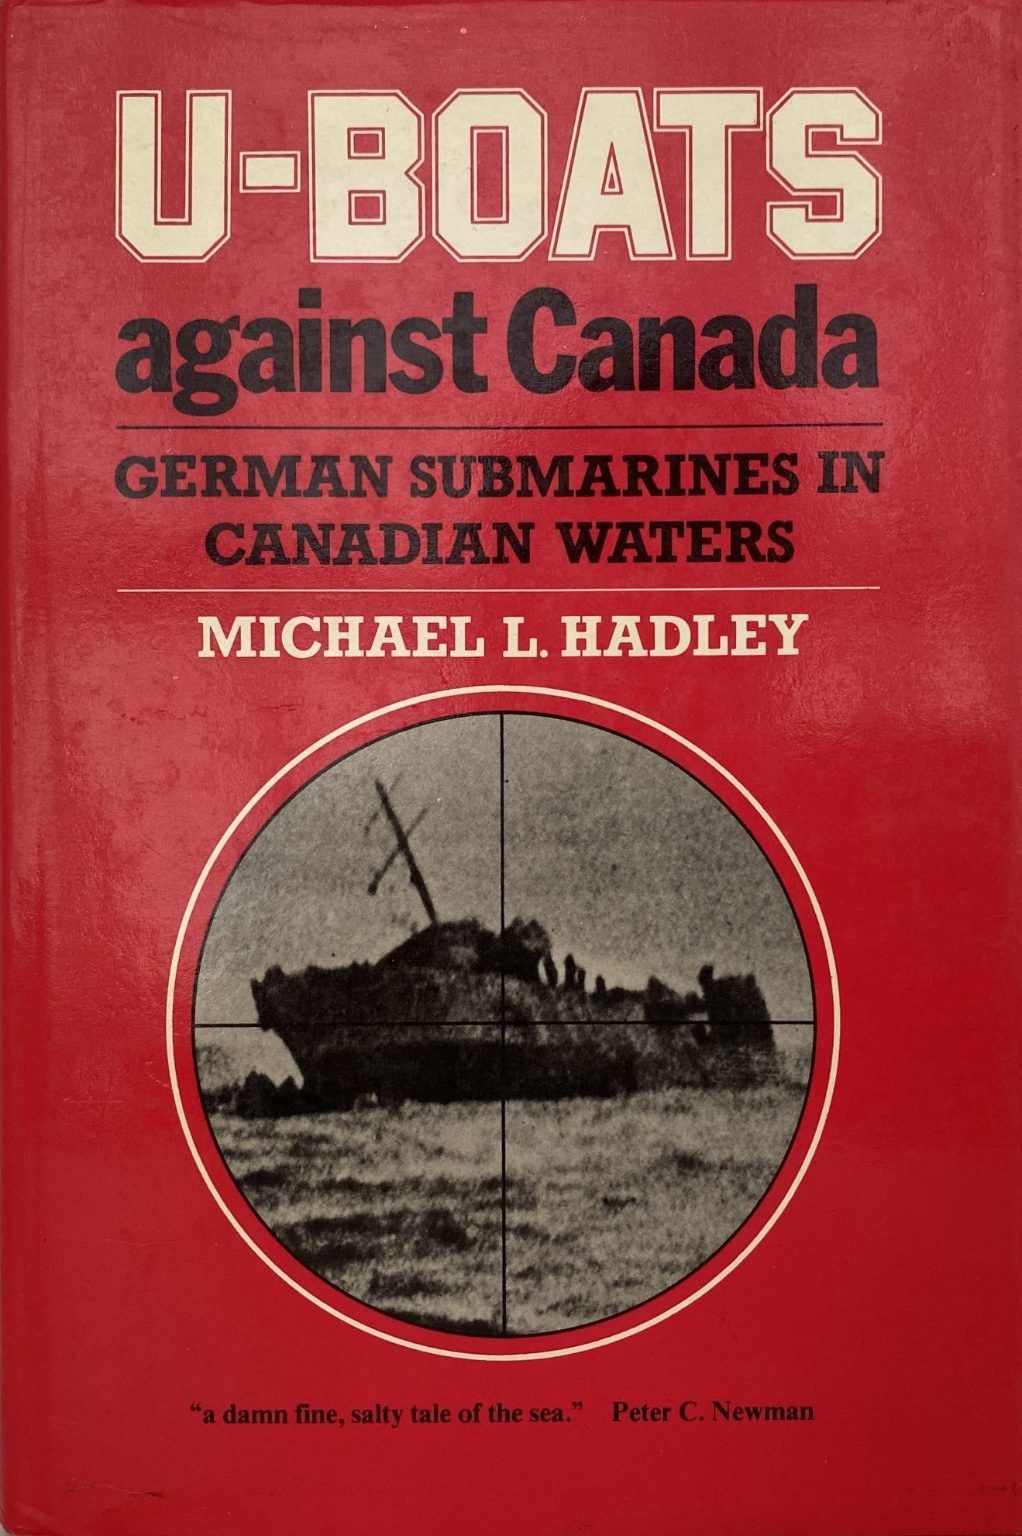 U-BOATS against Canada: German Submarines in Canadian Waters